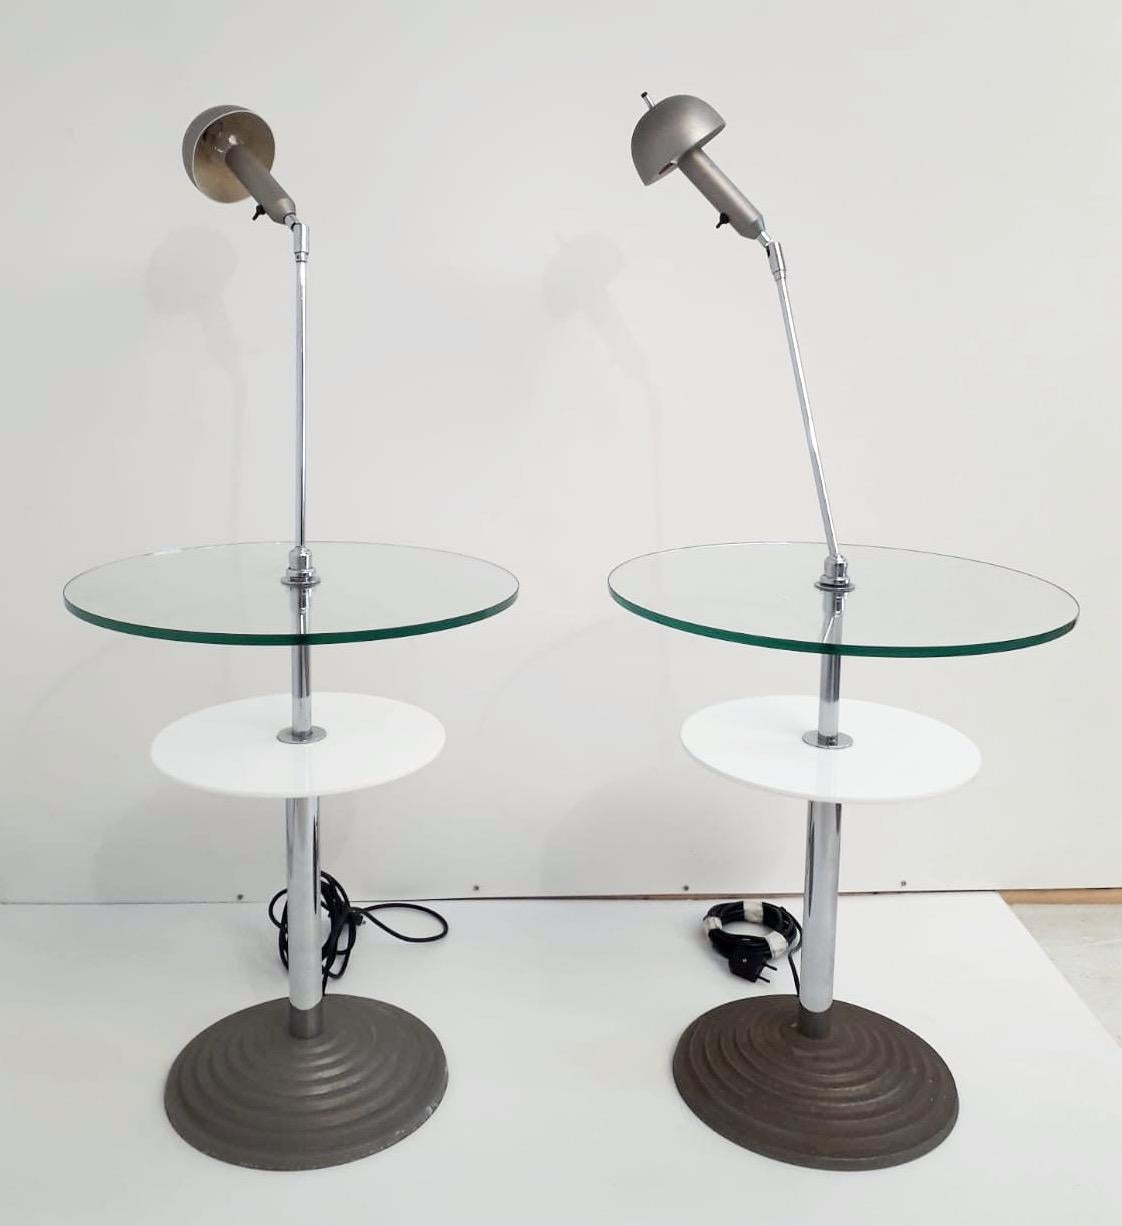 Original pair of Model 2755 vintage lamp tables with adjustable stems, clear and opaline glass tops, designed by Daniela Puppa and Franco Raggi for Fontana Arte, made in Italy in 1988
Original sticker on the table base.
1 light each table / E26 or